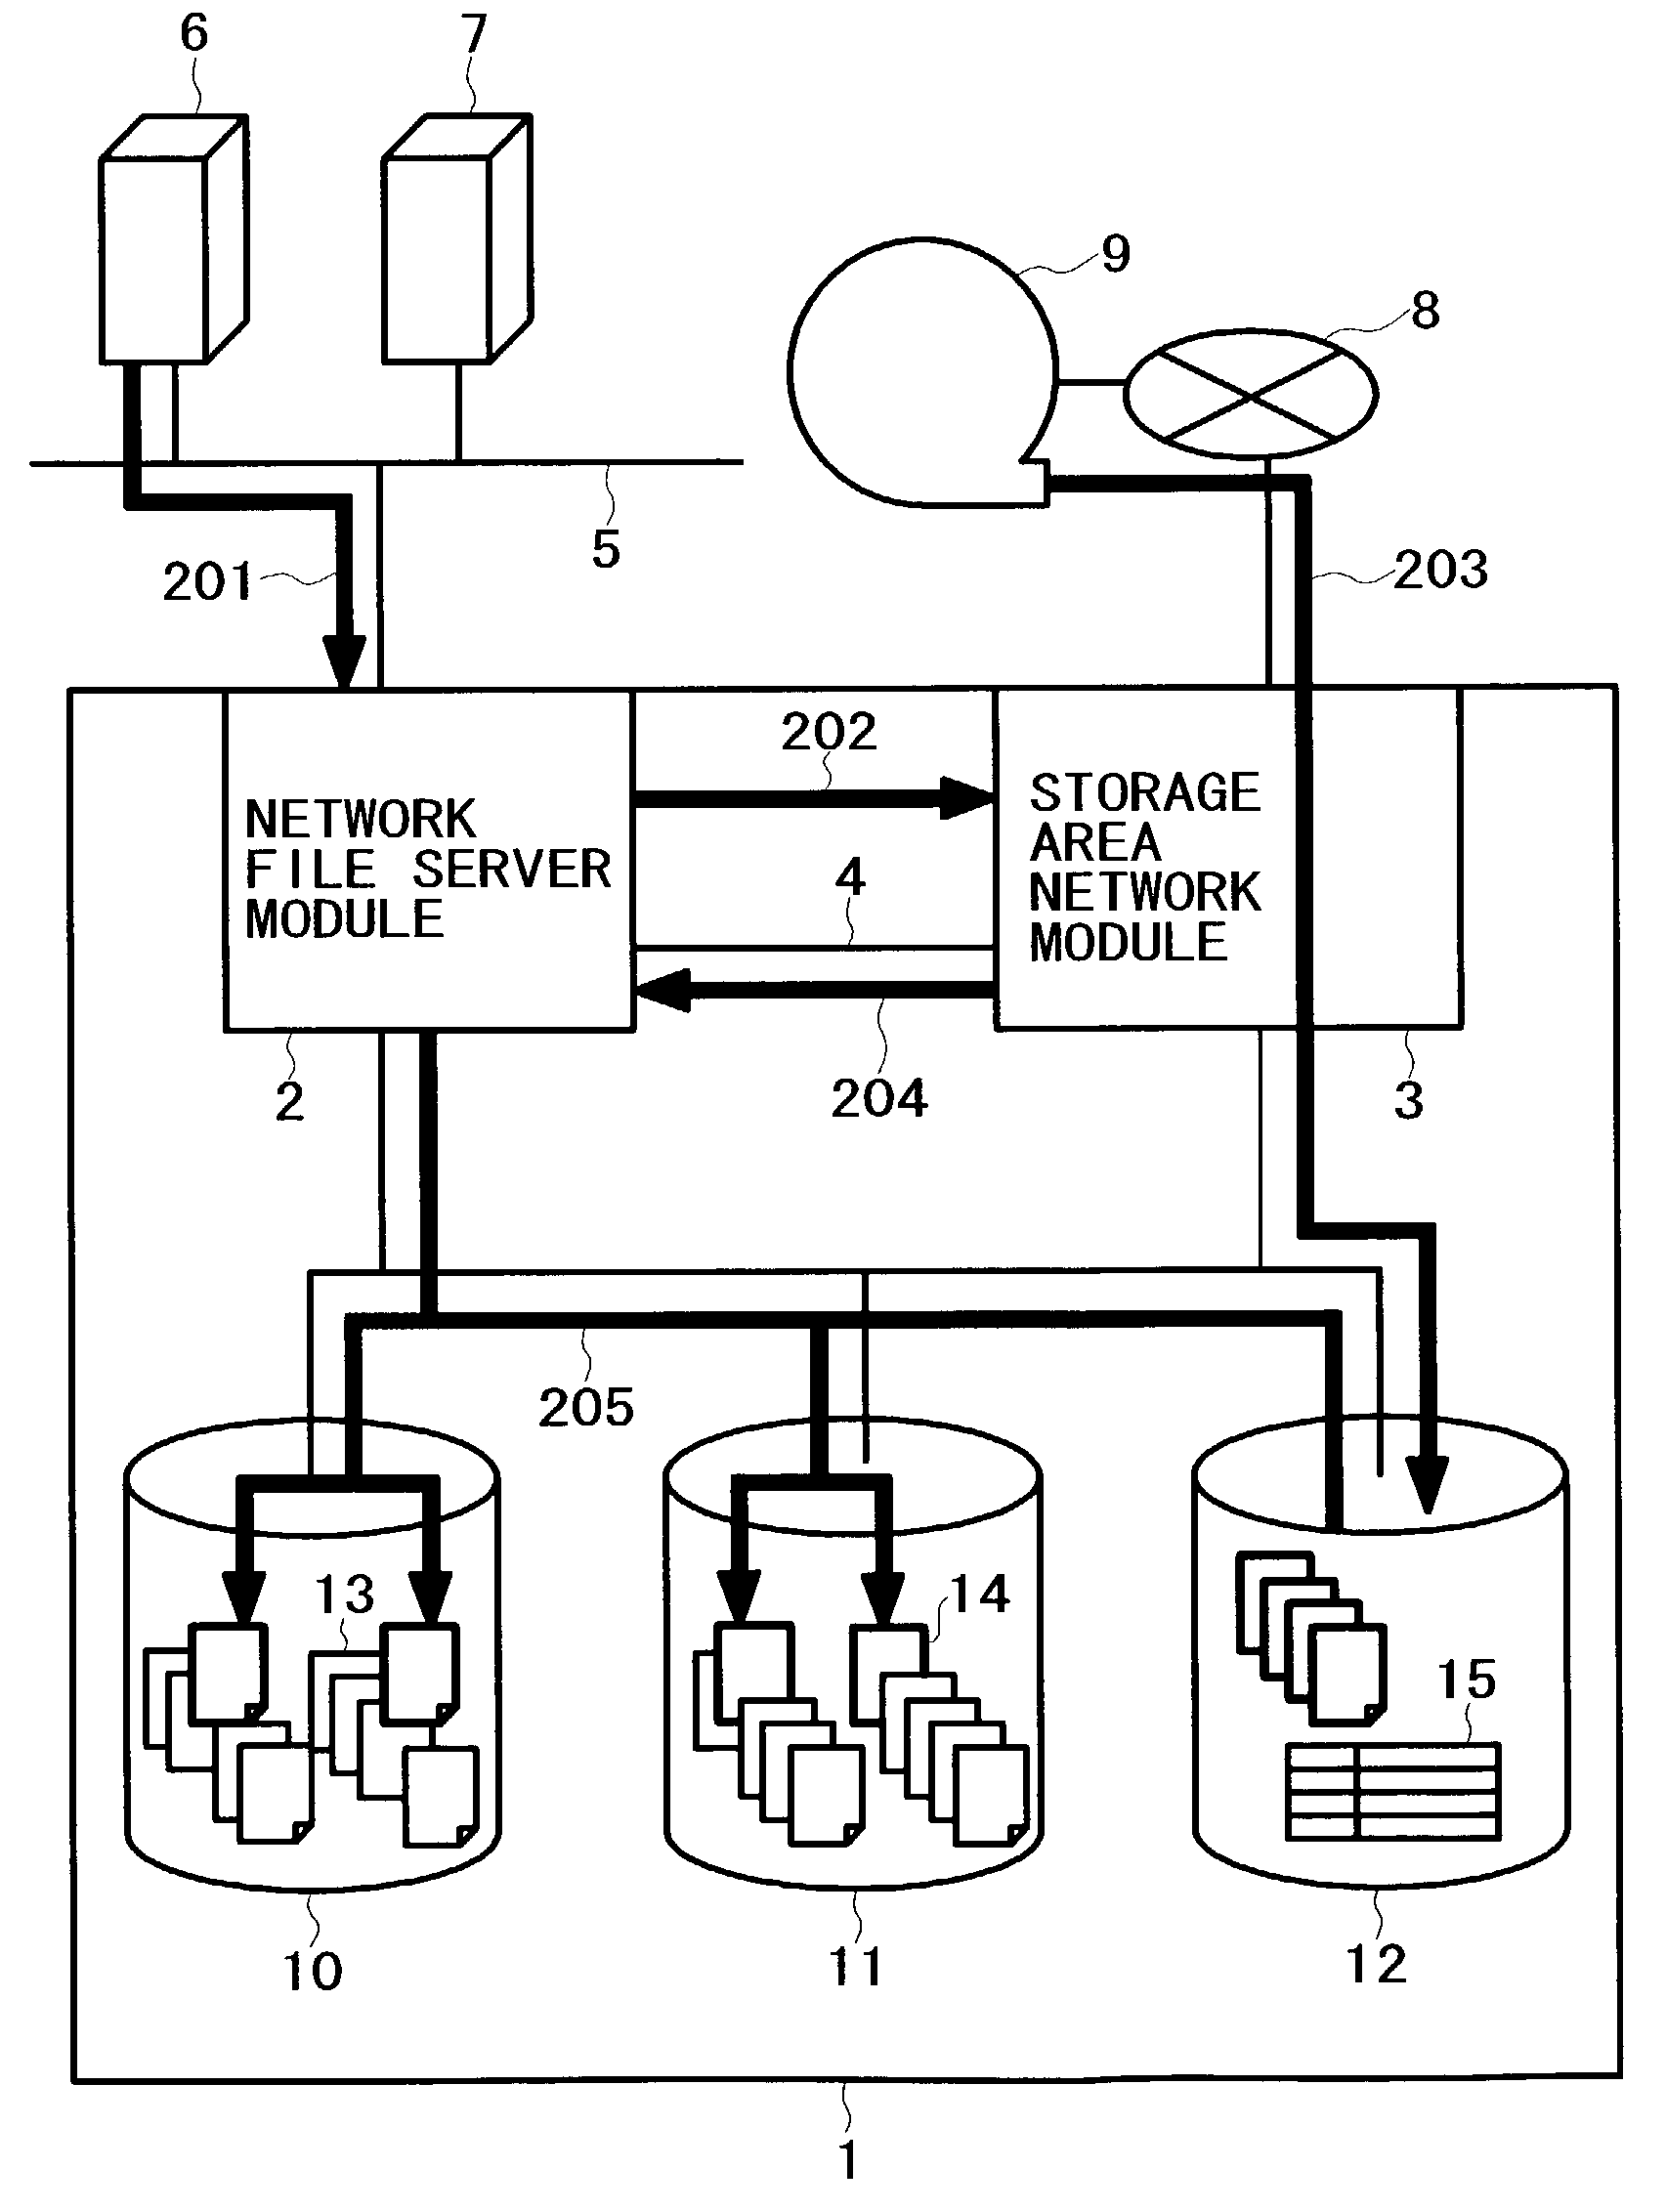 Method for backing up a disk array system